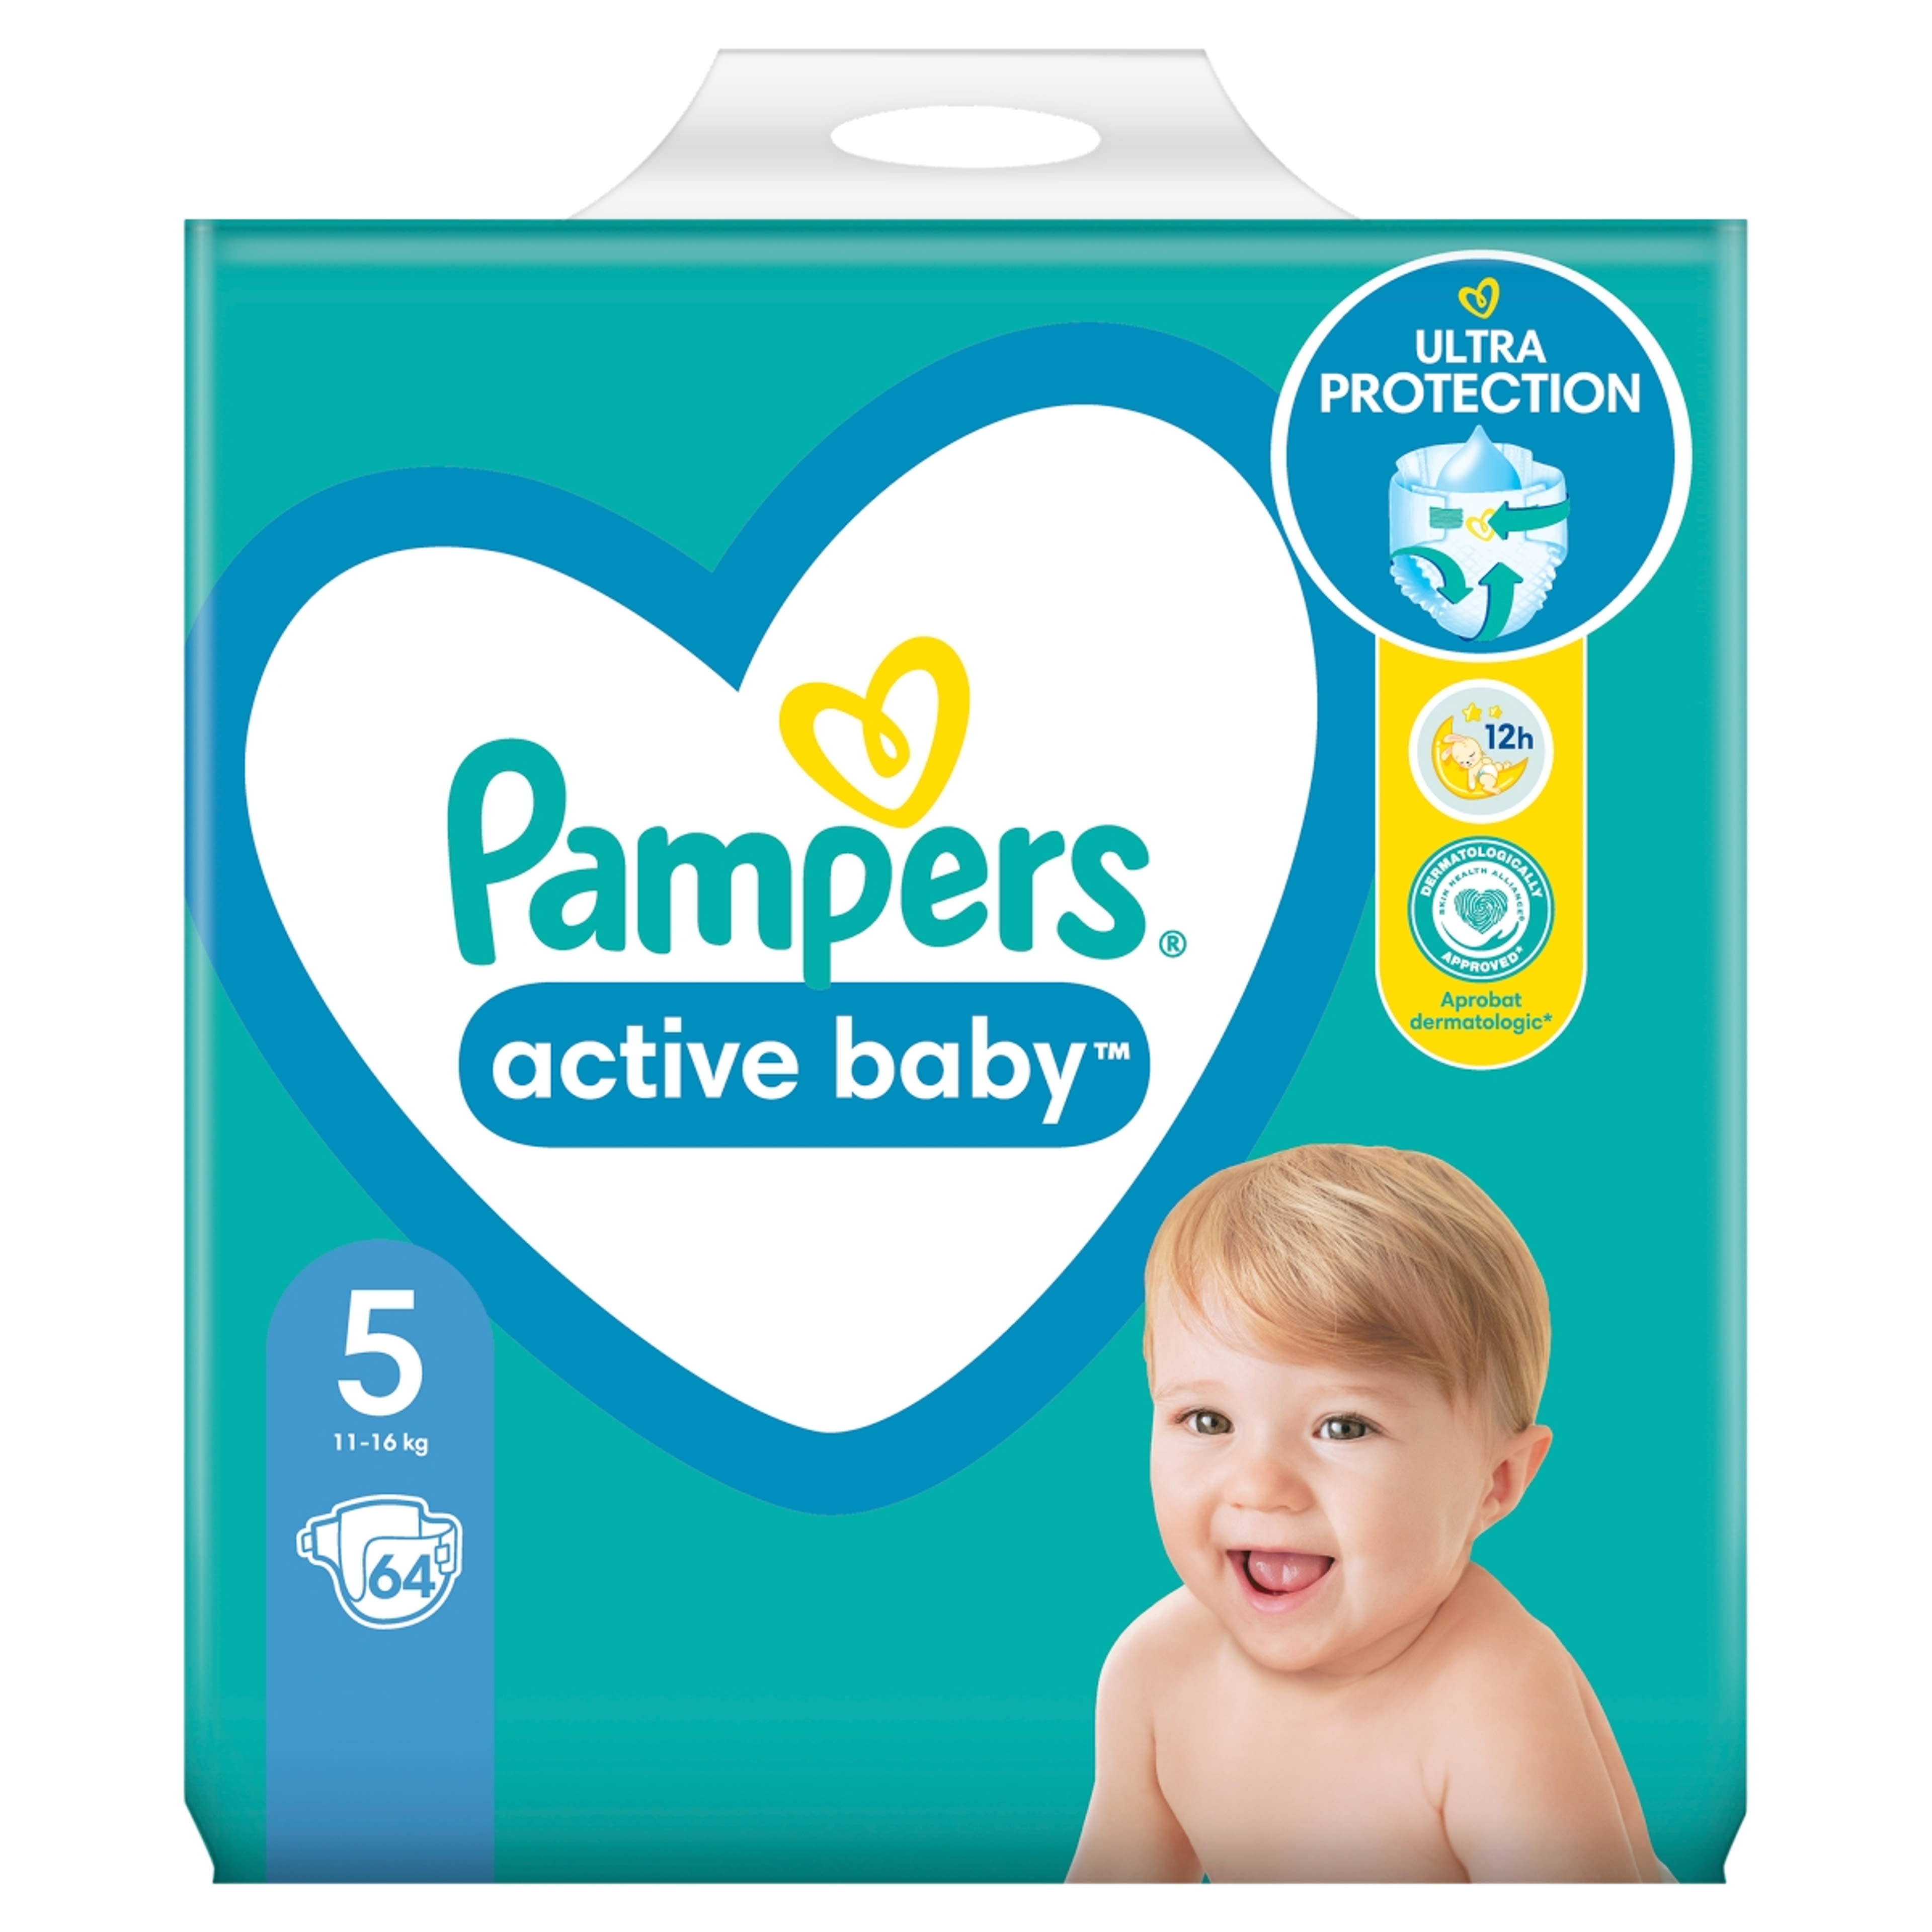 Pampers Active Baby Giant Pack Pelenka 5 - 64 db